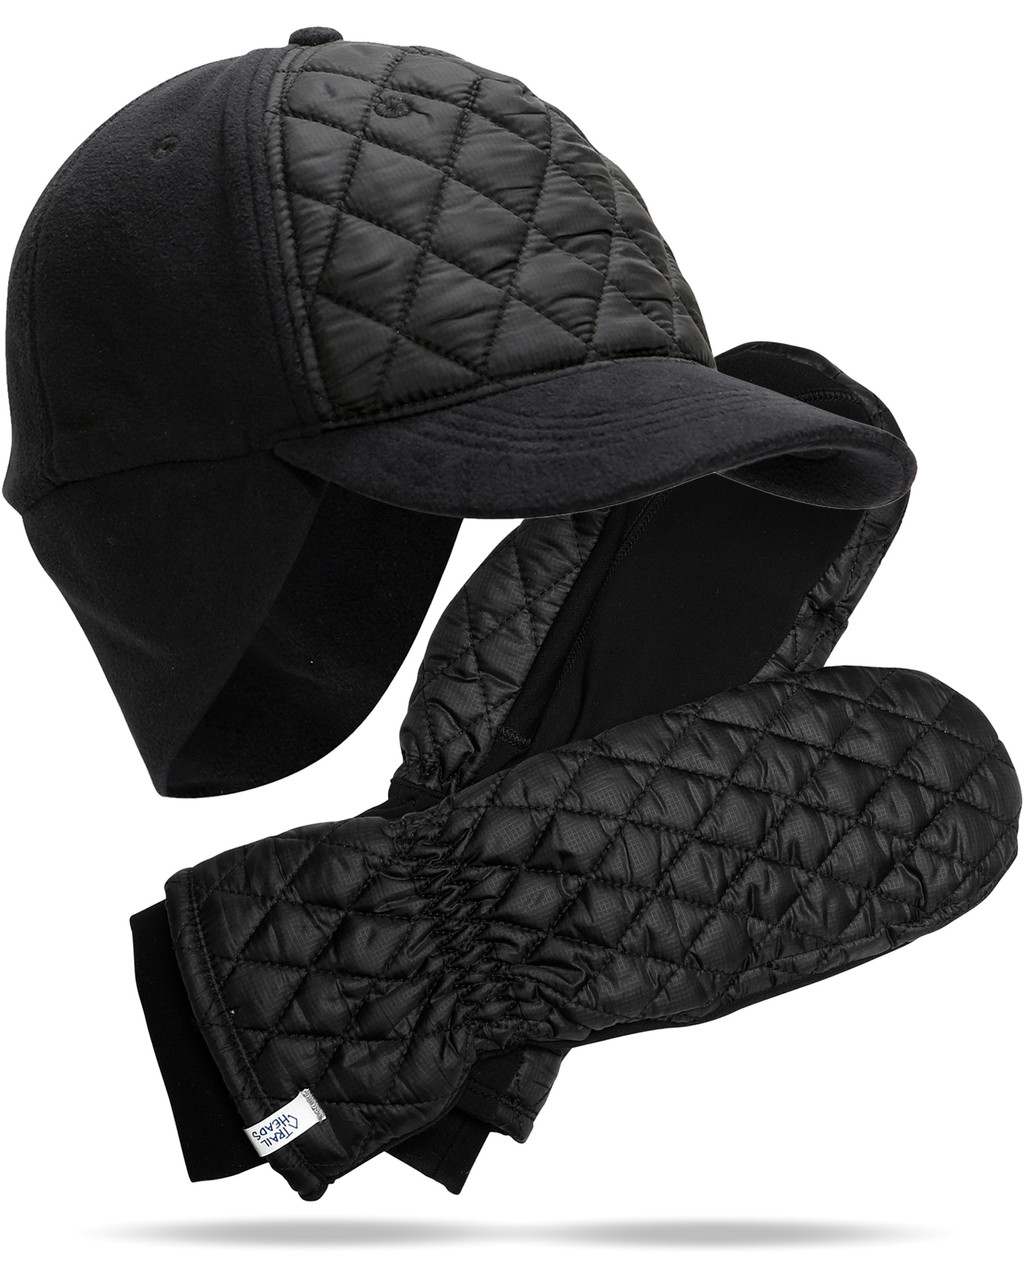 Women's Gift Set - Winter Quilted Ponytail Hat and Mittens for Women